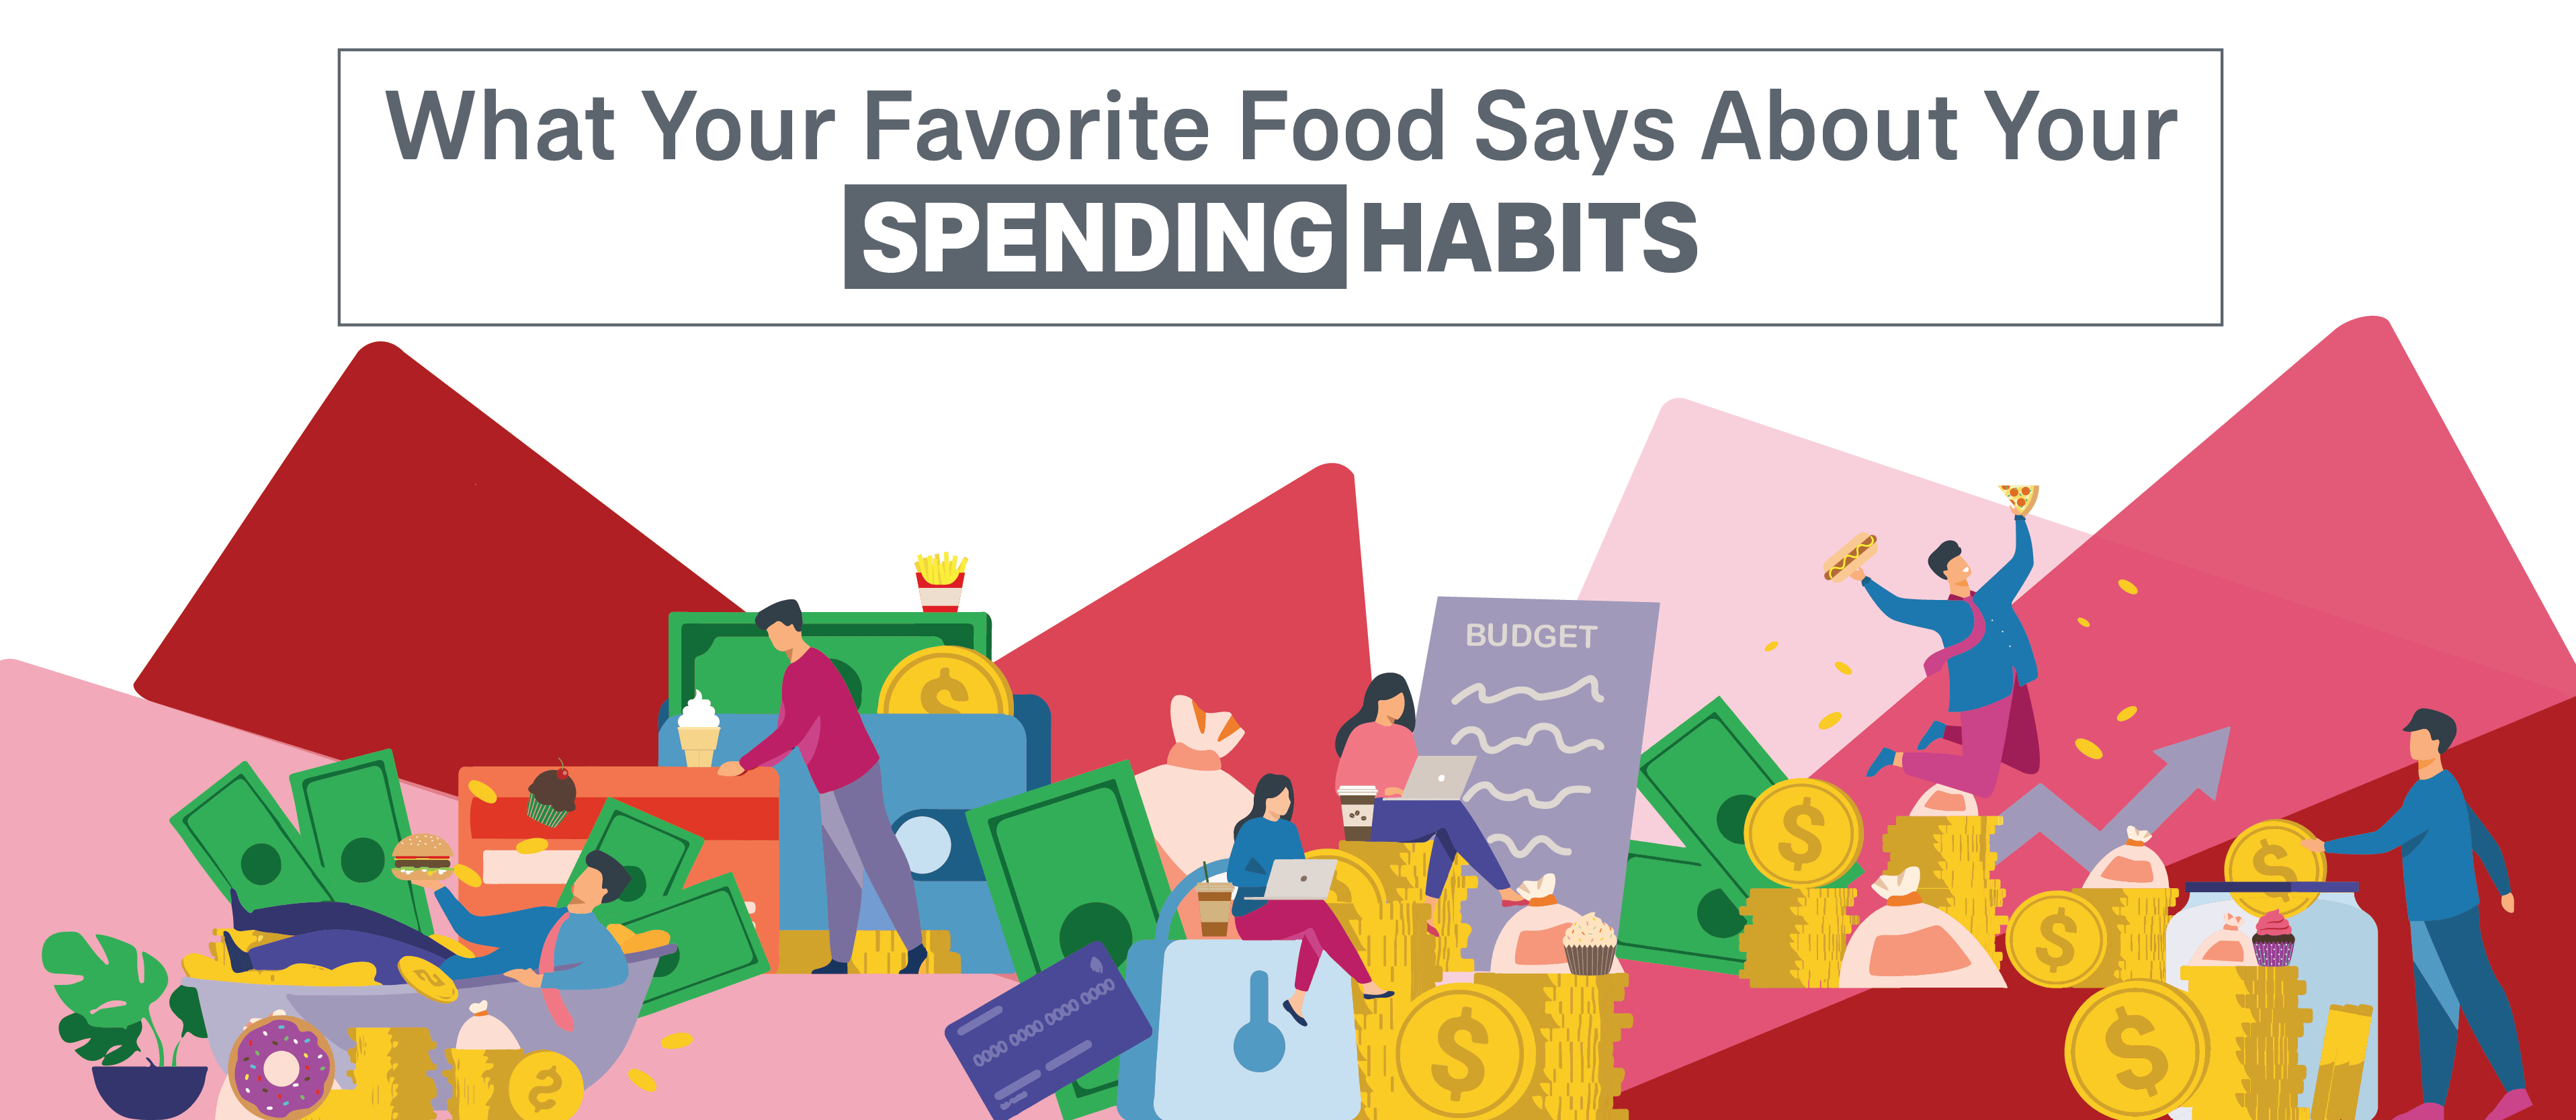 What Your Favorite Food Says About Your Money Spending Habits